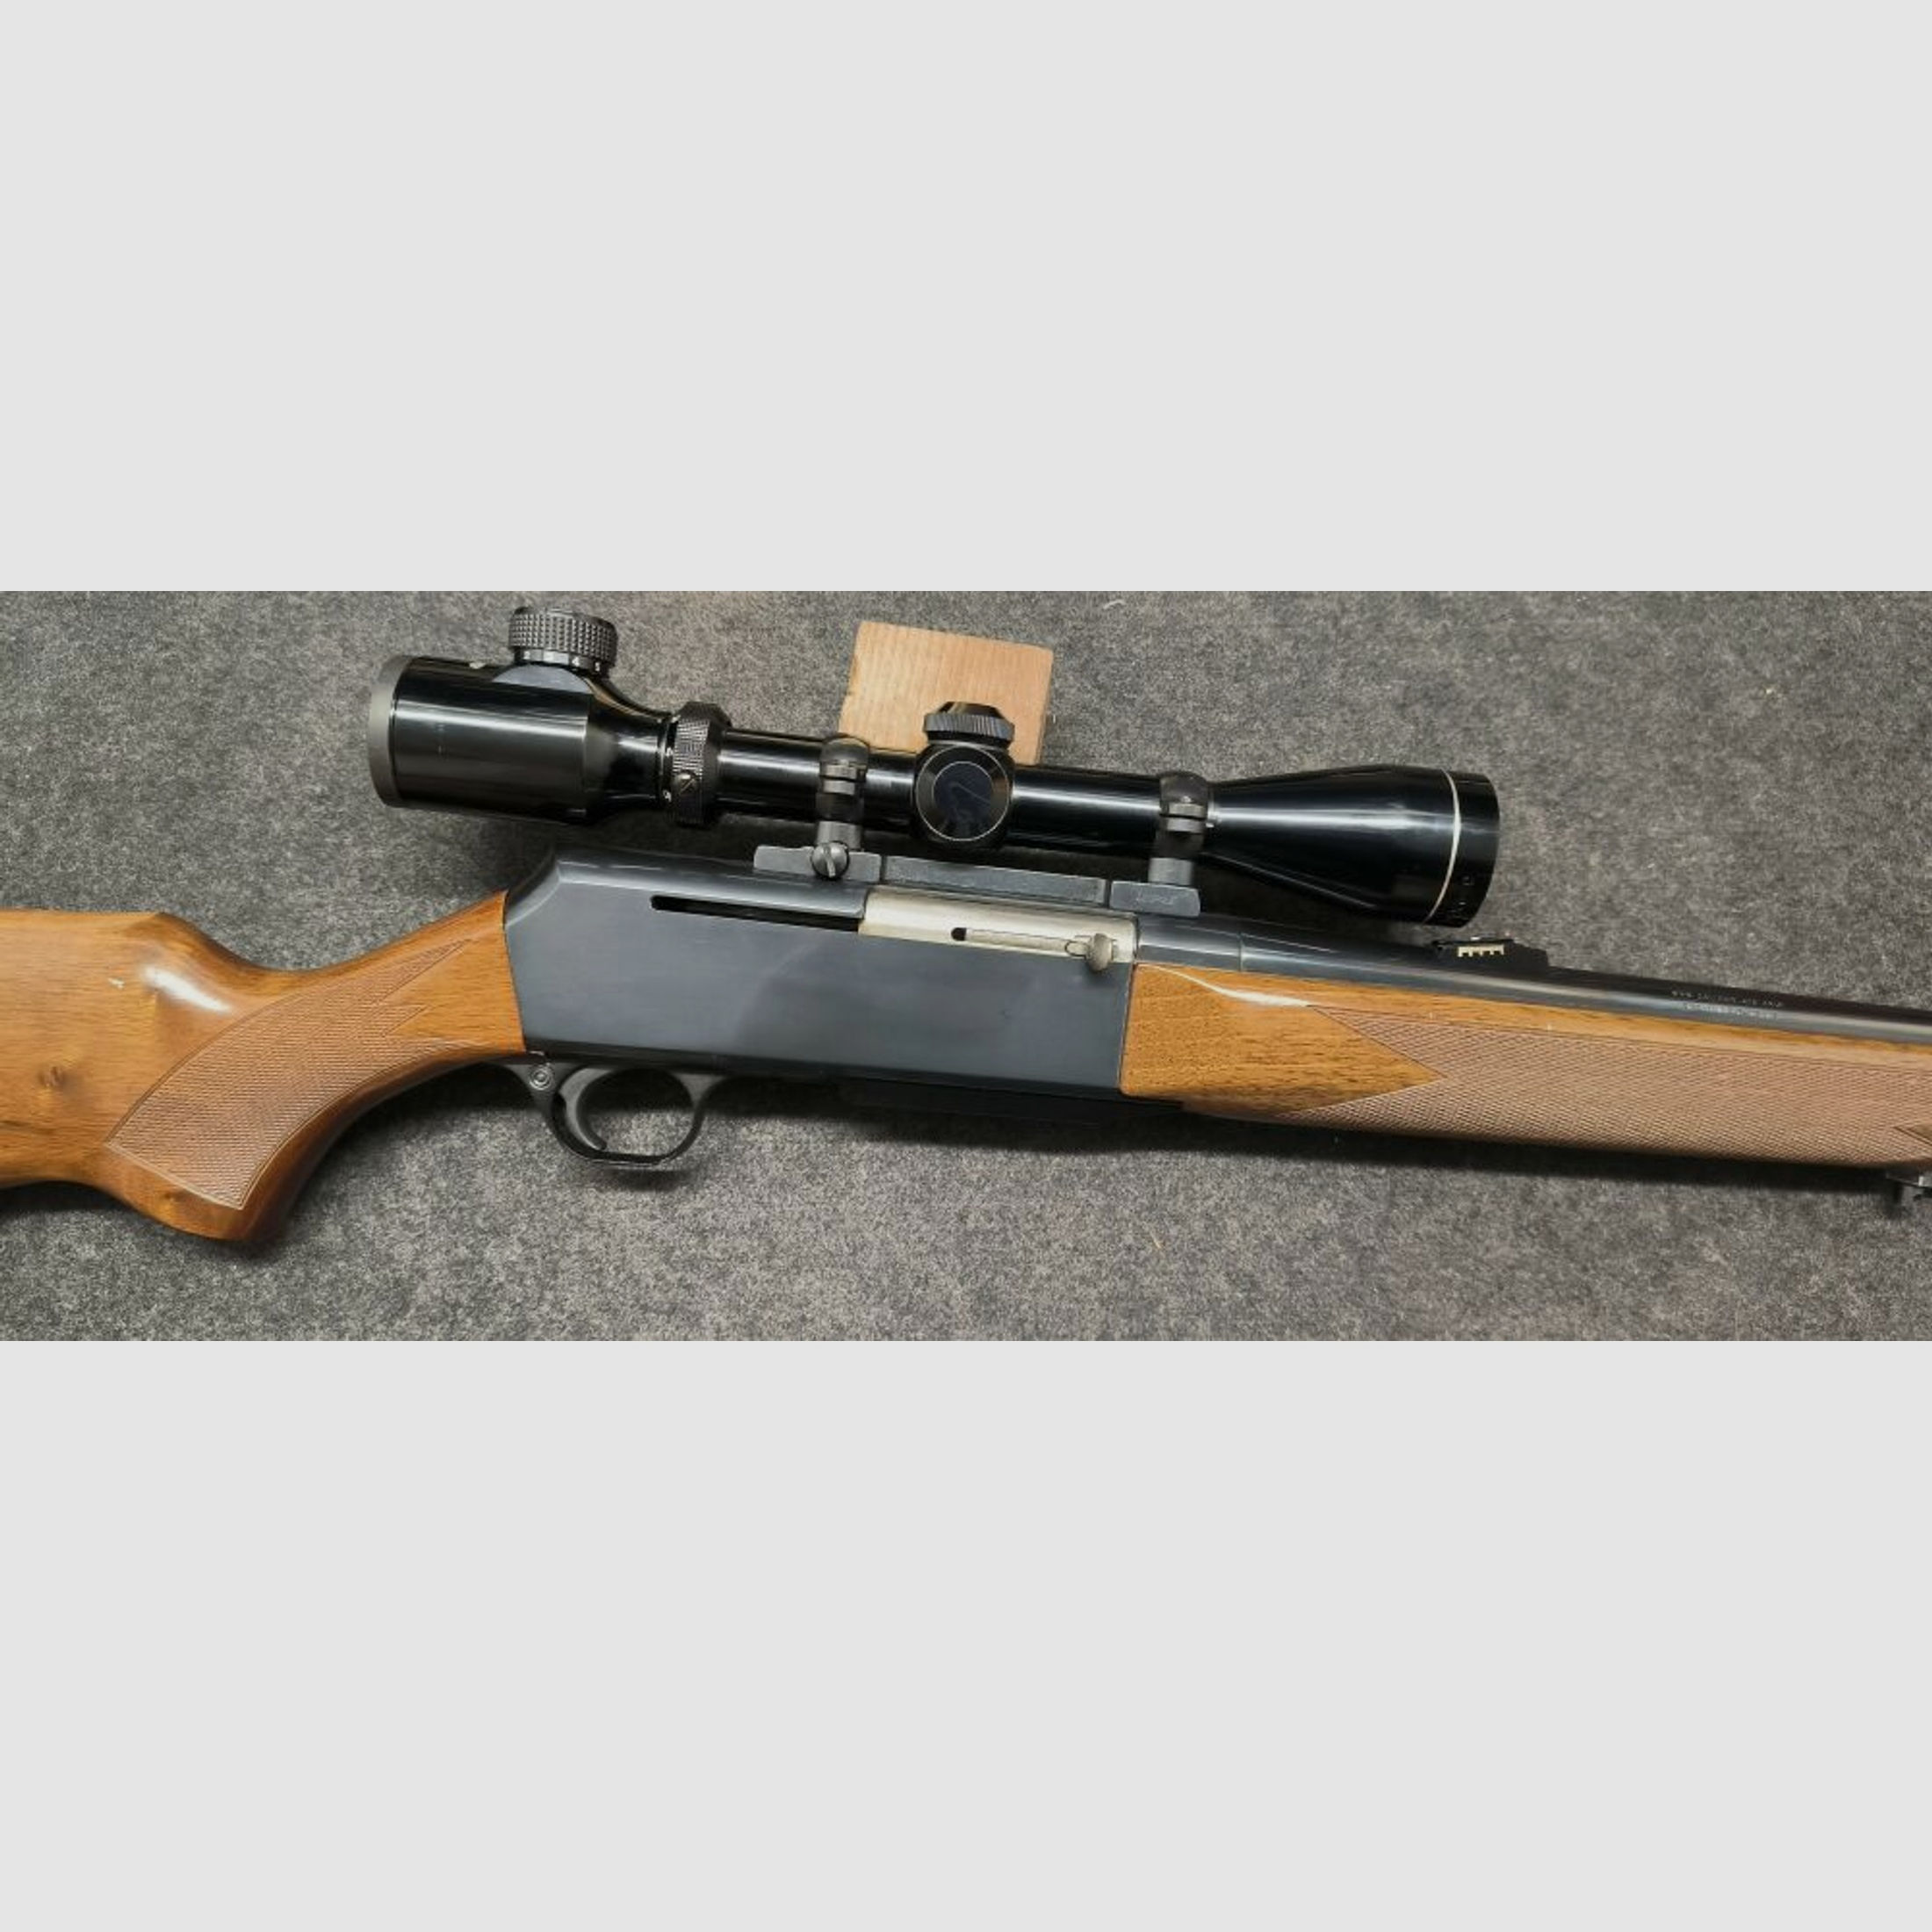 FN / Fabrique Nationale	 Browning BAR - .308Win